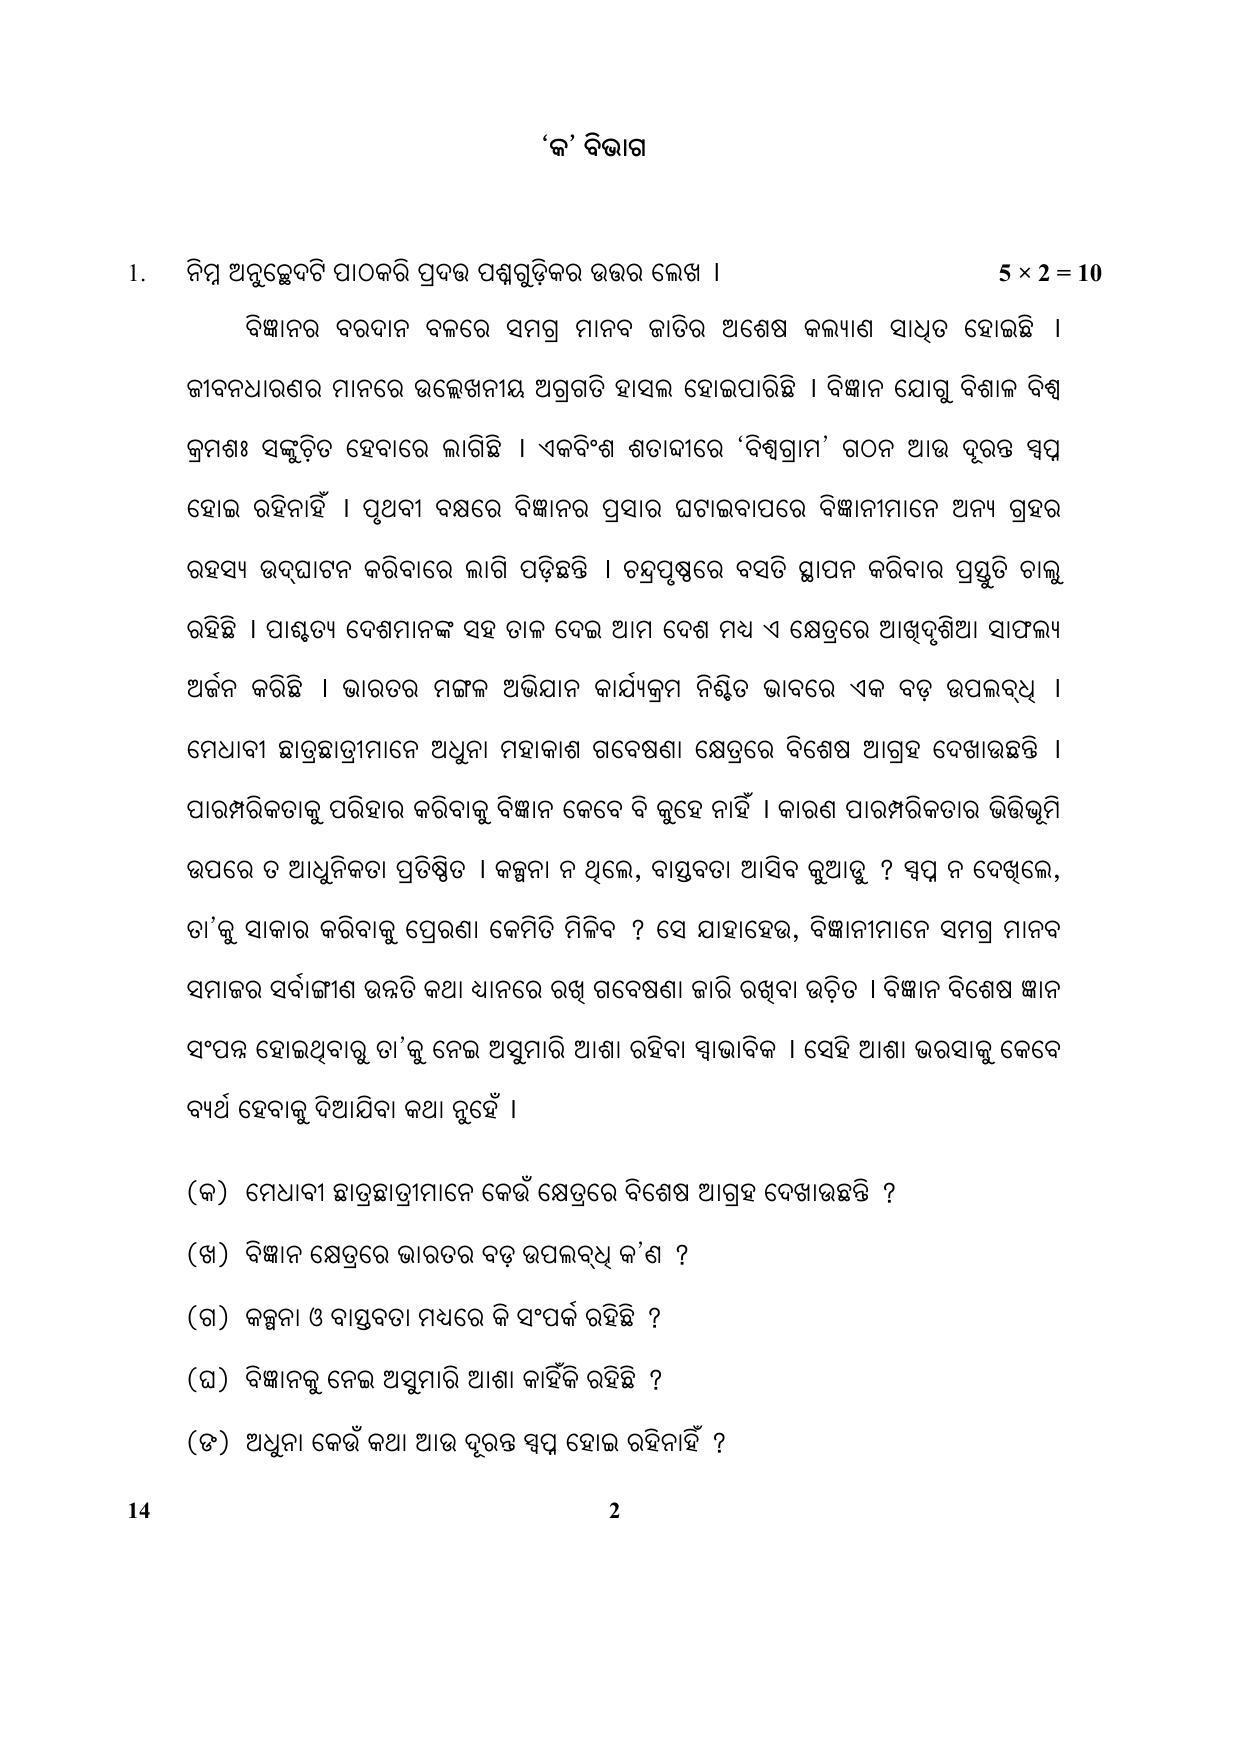 CBSE Class 10 14 (Odia) 2018 Question Paper - Page 2